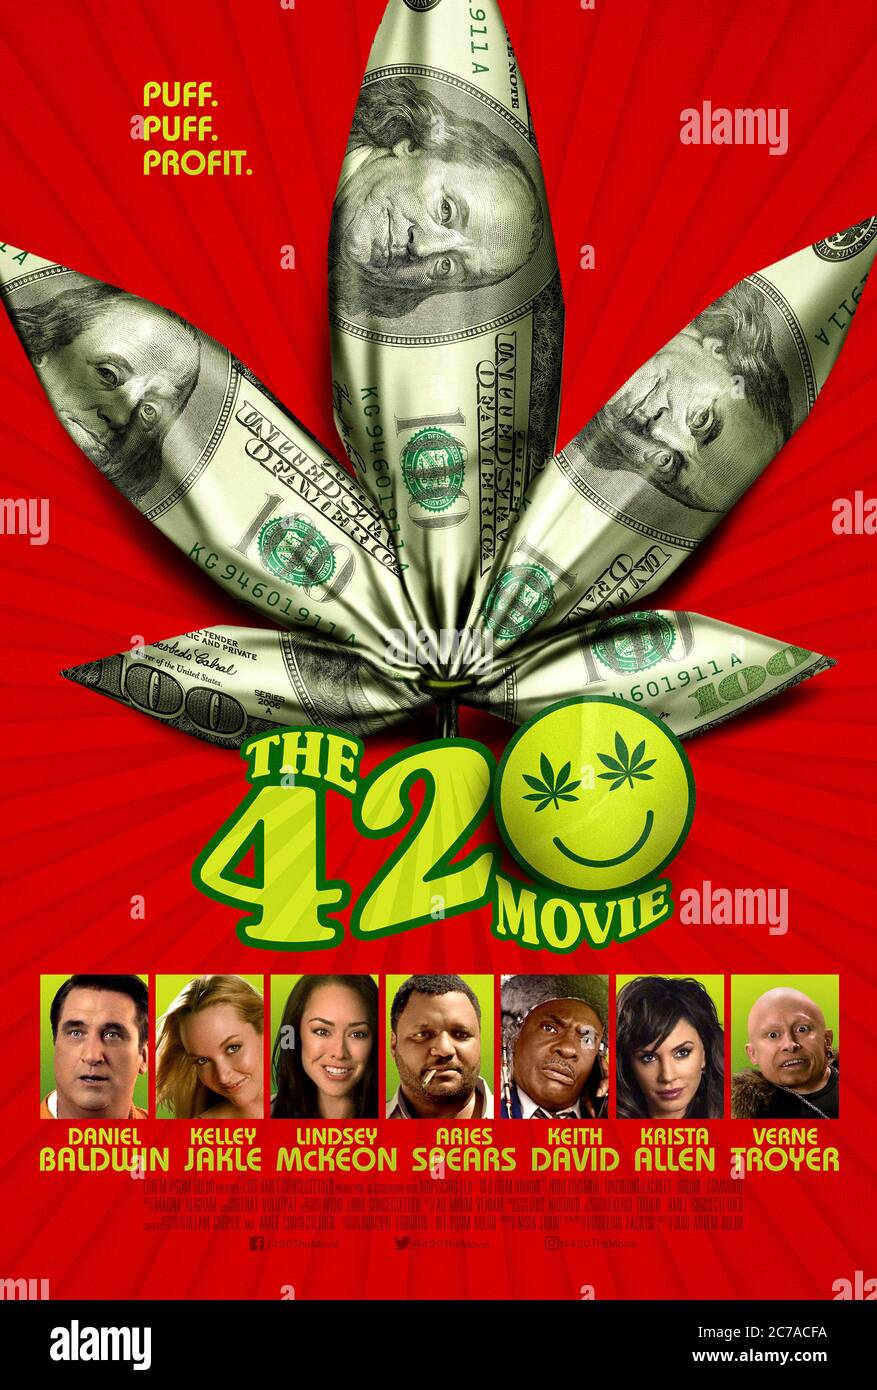 The 420 Movie: Mary & Jane (2020) directed by Robert A. Johnson and starring Keith David, Krista Allen, Lindsey McKeon and Verne Troyer. Documentary following boxing coach Harry Keitt and 3 young boxers both in and out of the ring. Stock Photo